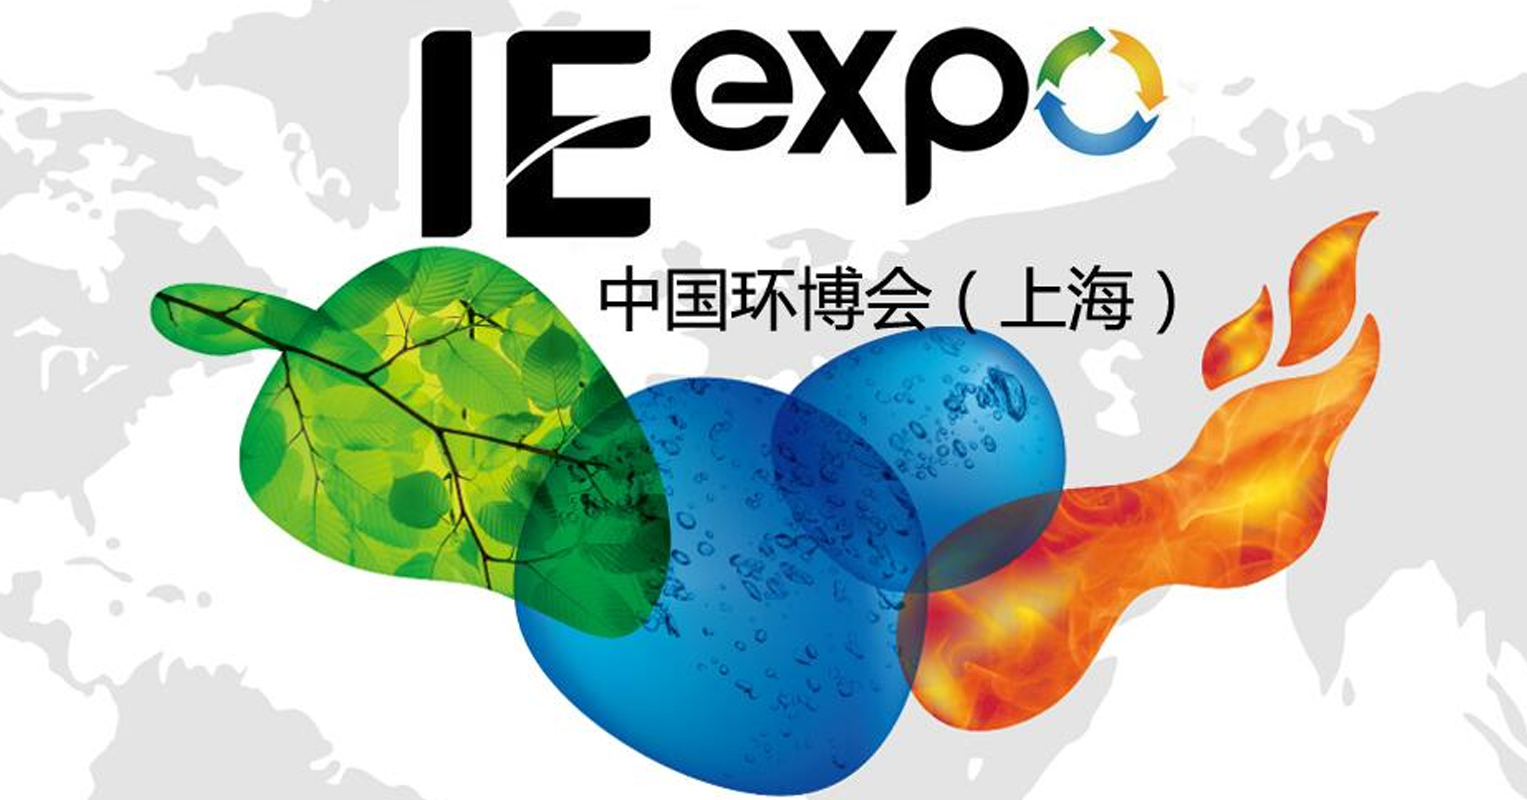 ie expo 2021